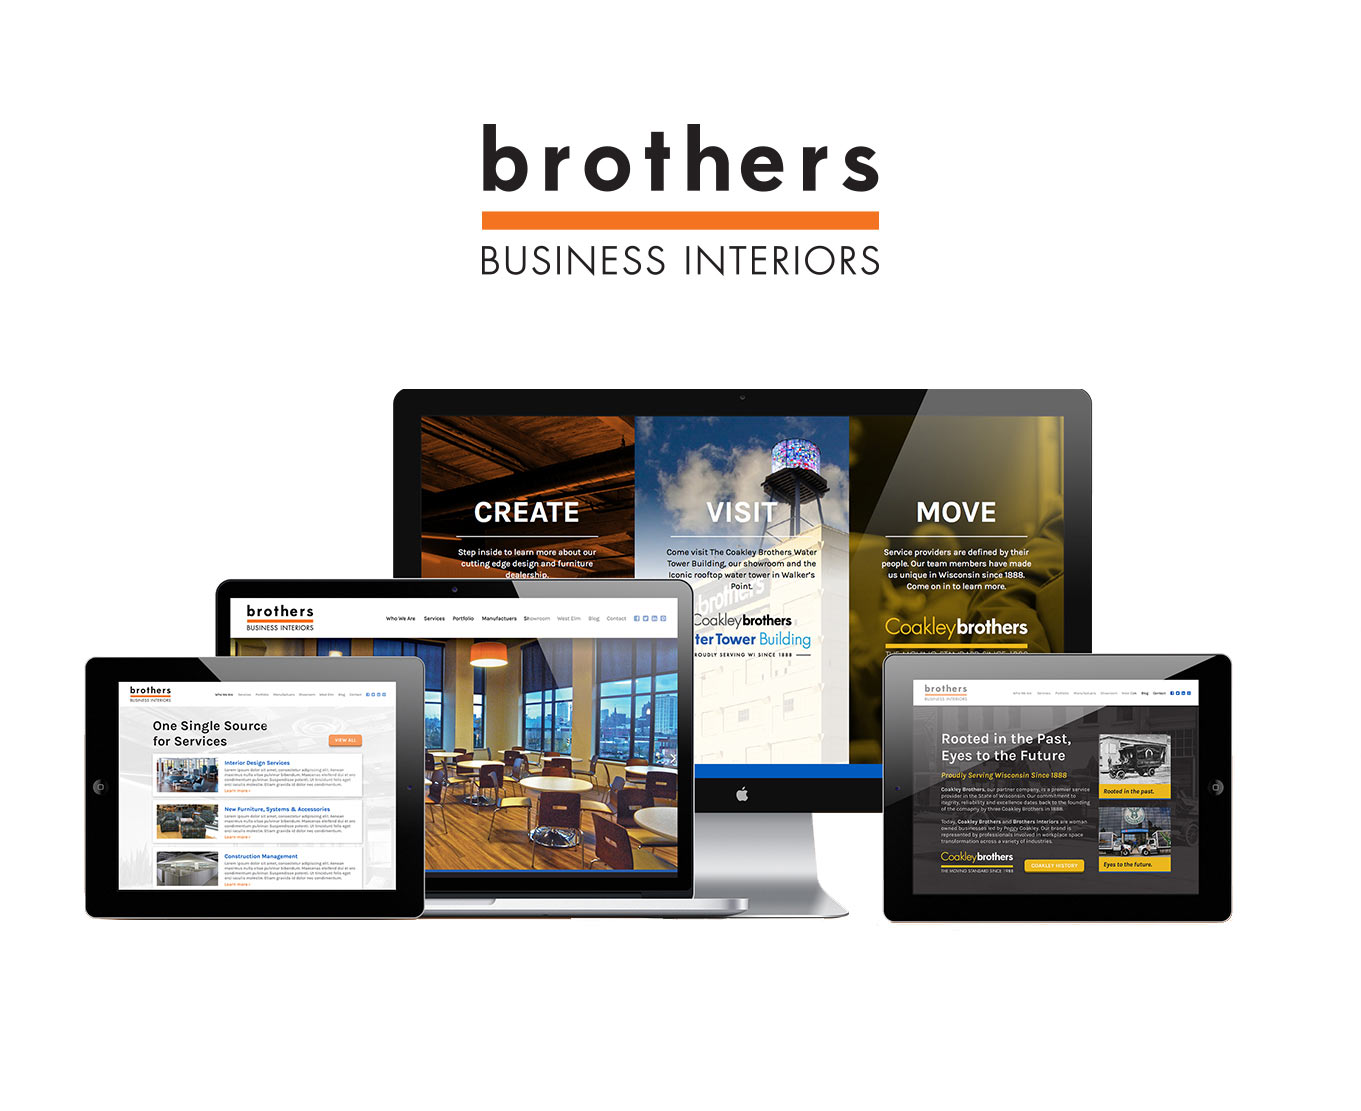 Brothers Business Interiors